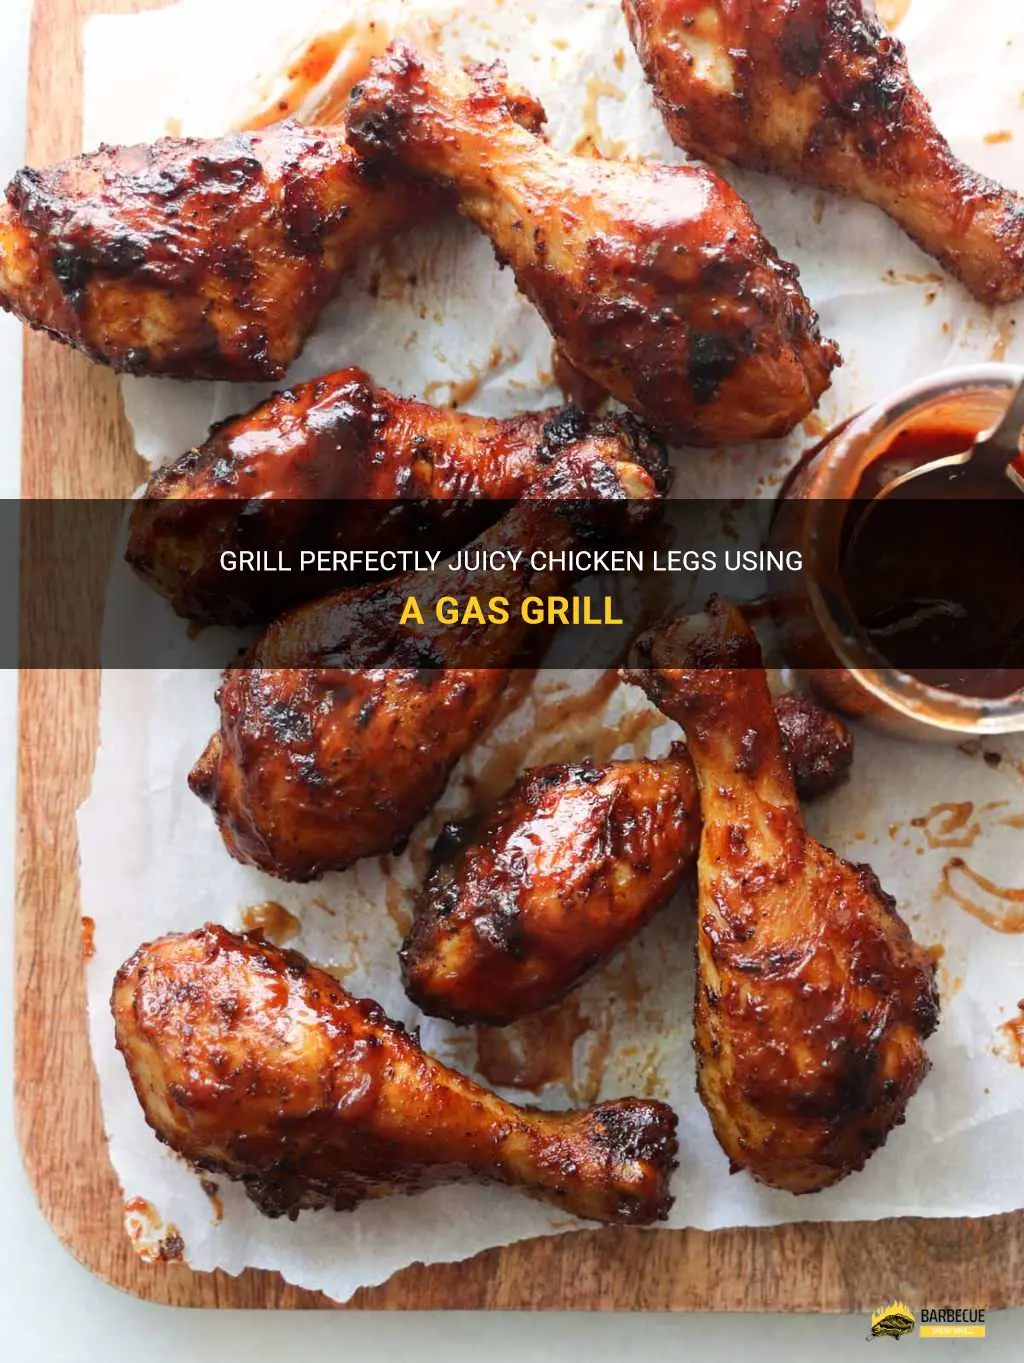 Grill Perfectly Juicy Chicken Legs Using A Gas Grill | ShunGrill